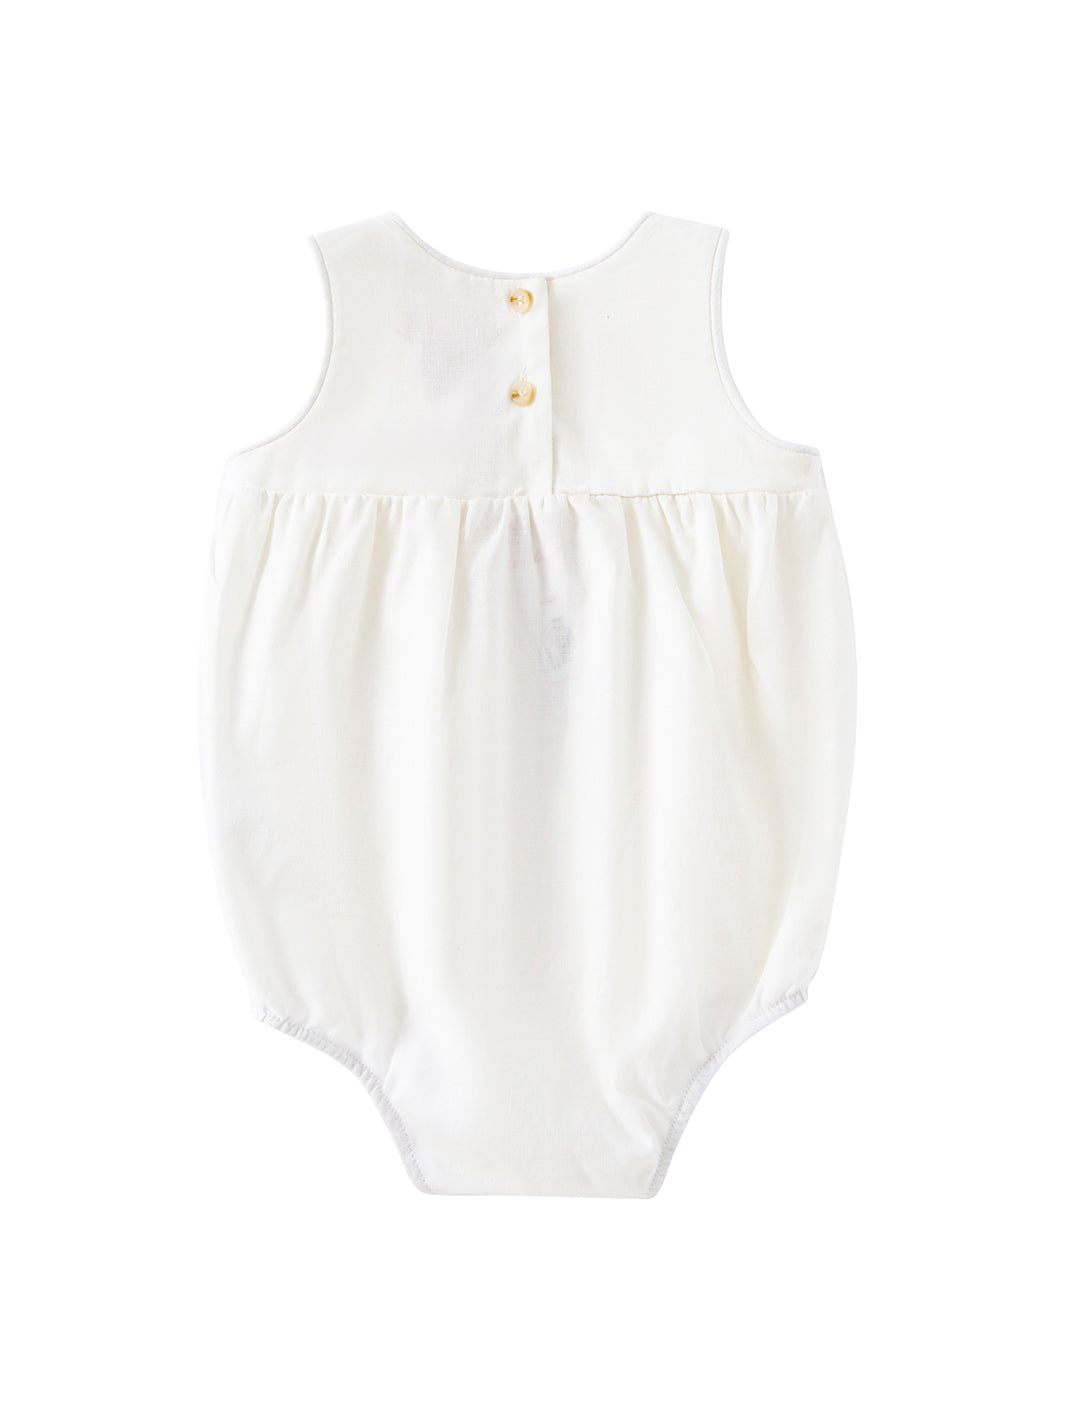 Baby Piping Romper - White